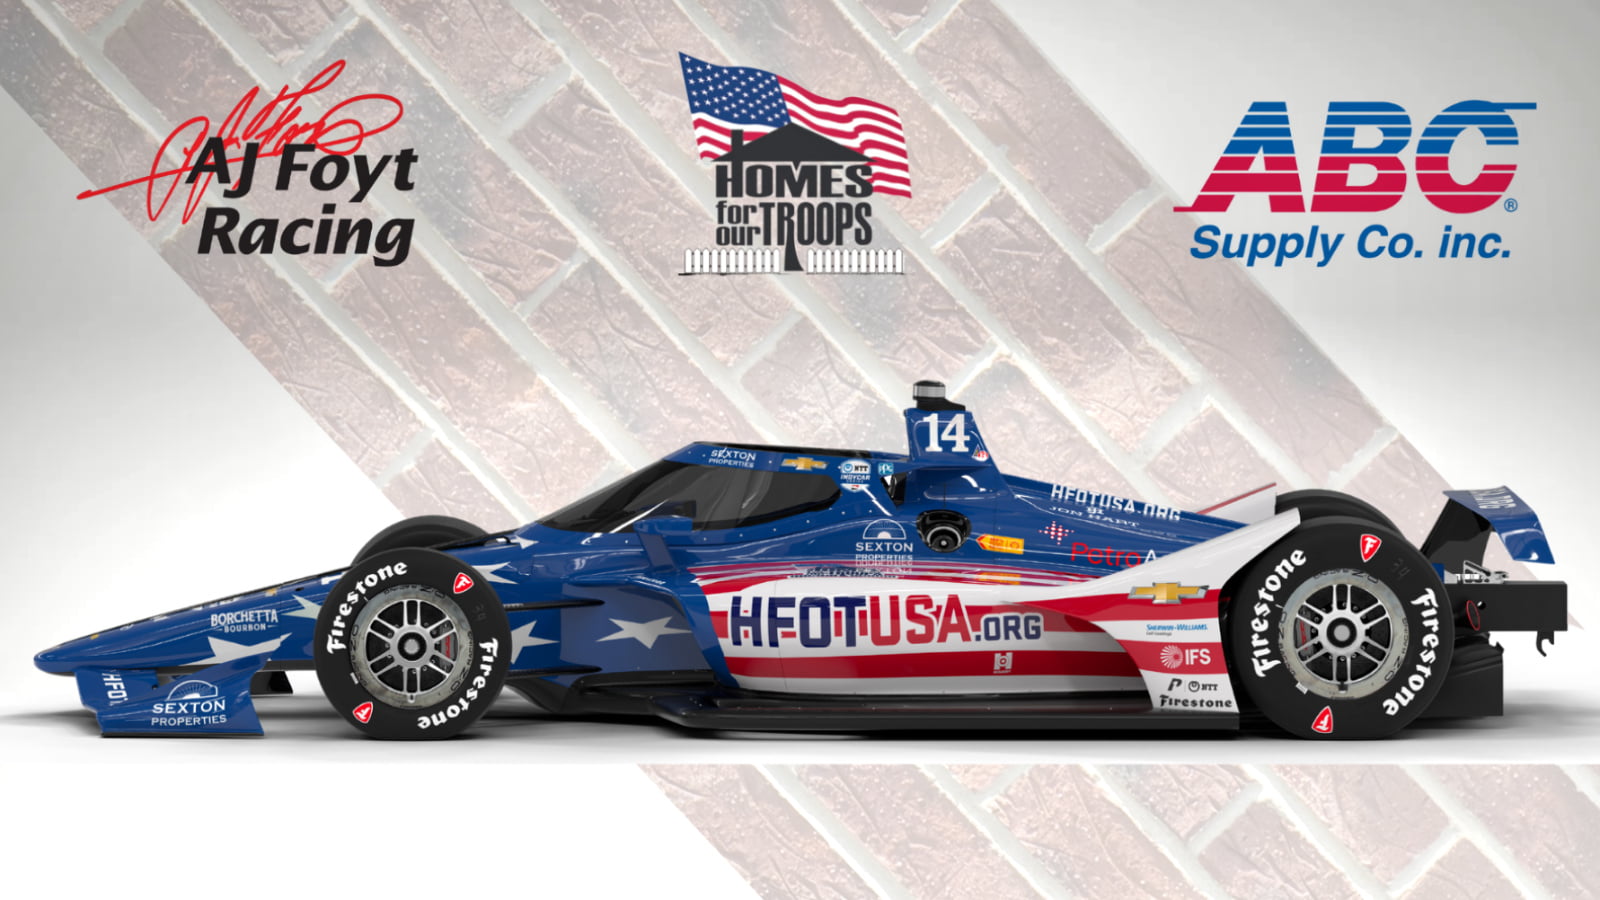 American flag livery returns for AJ Foyt Indy 500 entry